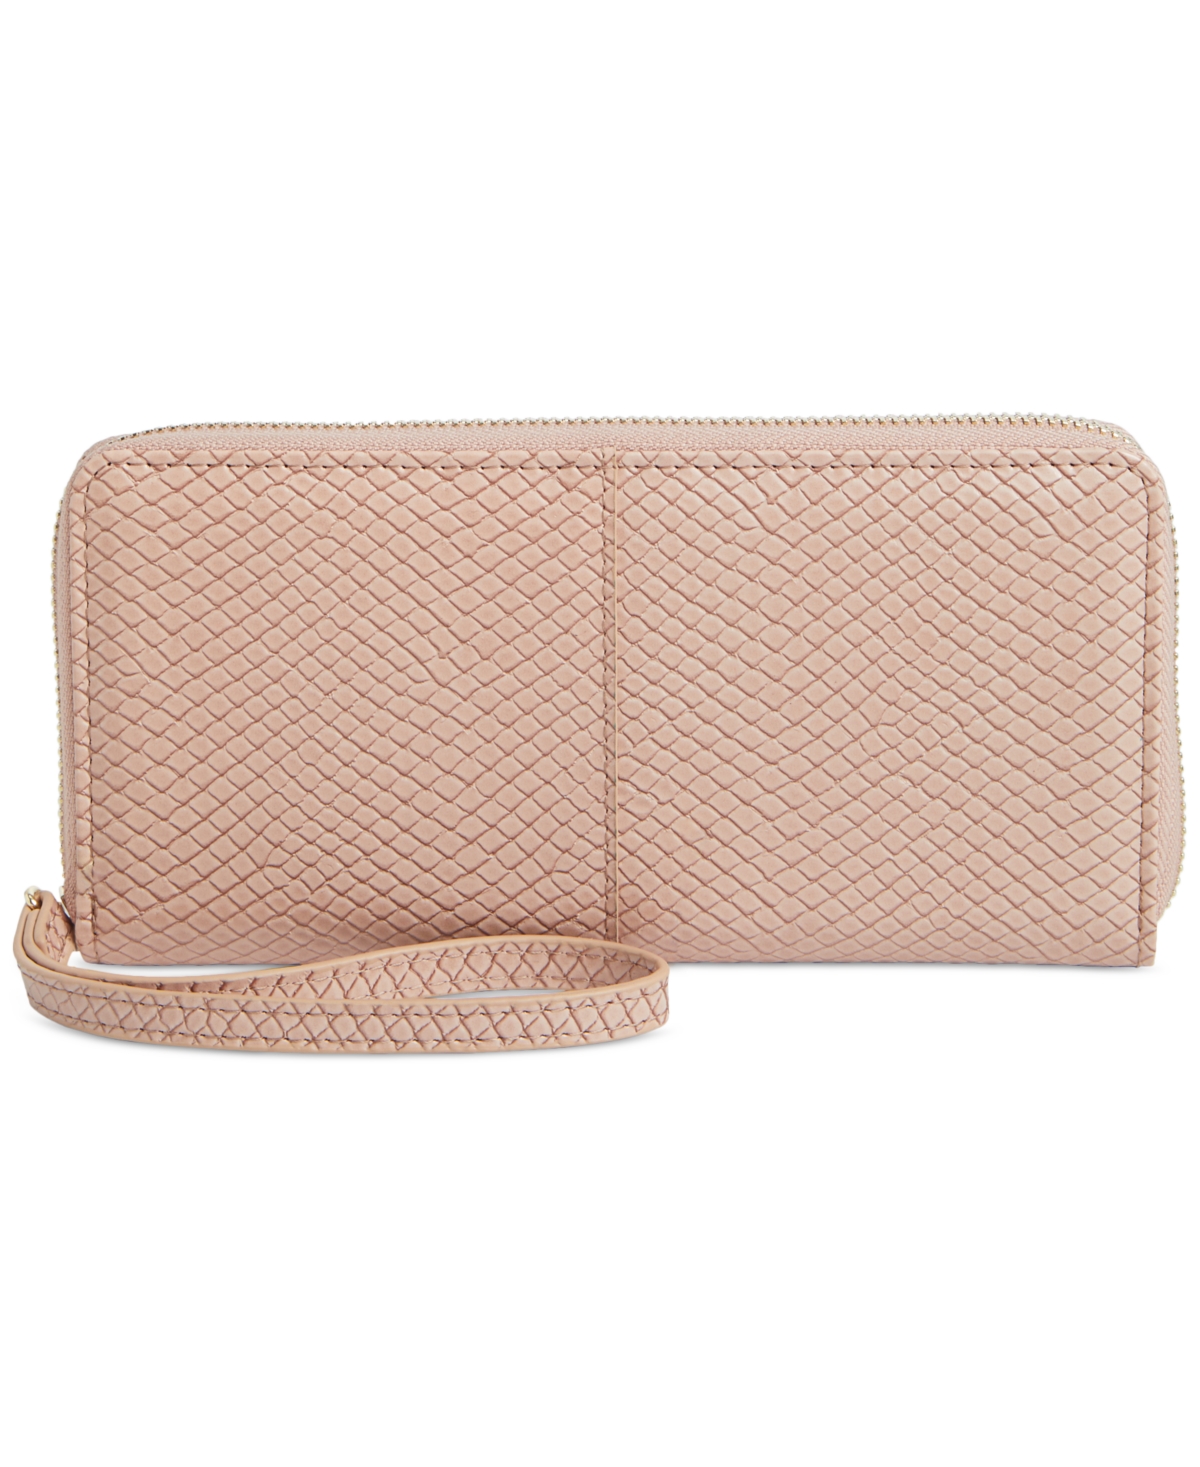 Angii Za Embossed Wallet, Created for Macy's - Chai Snake